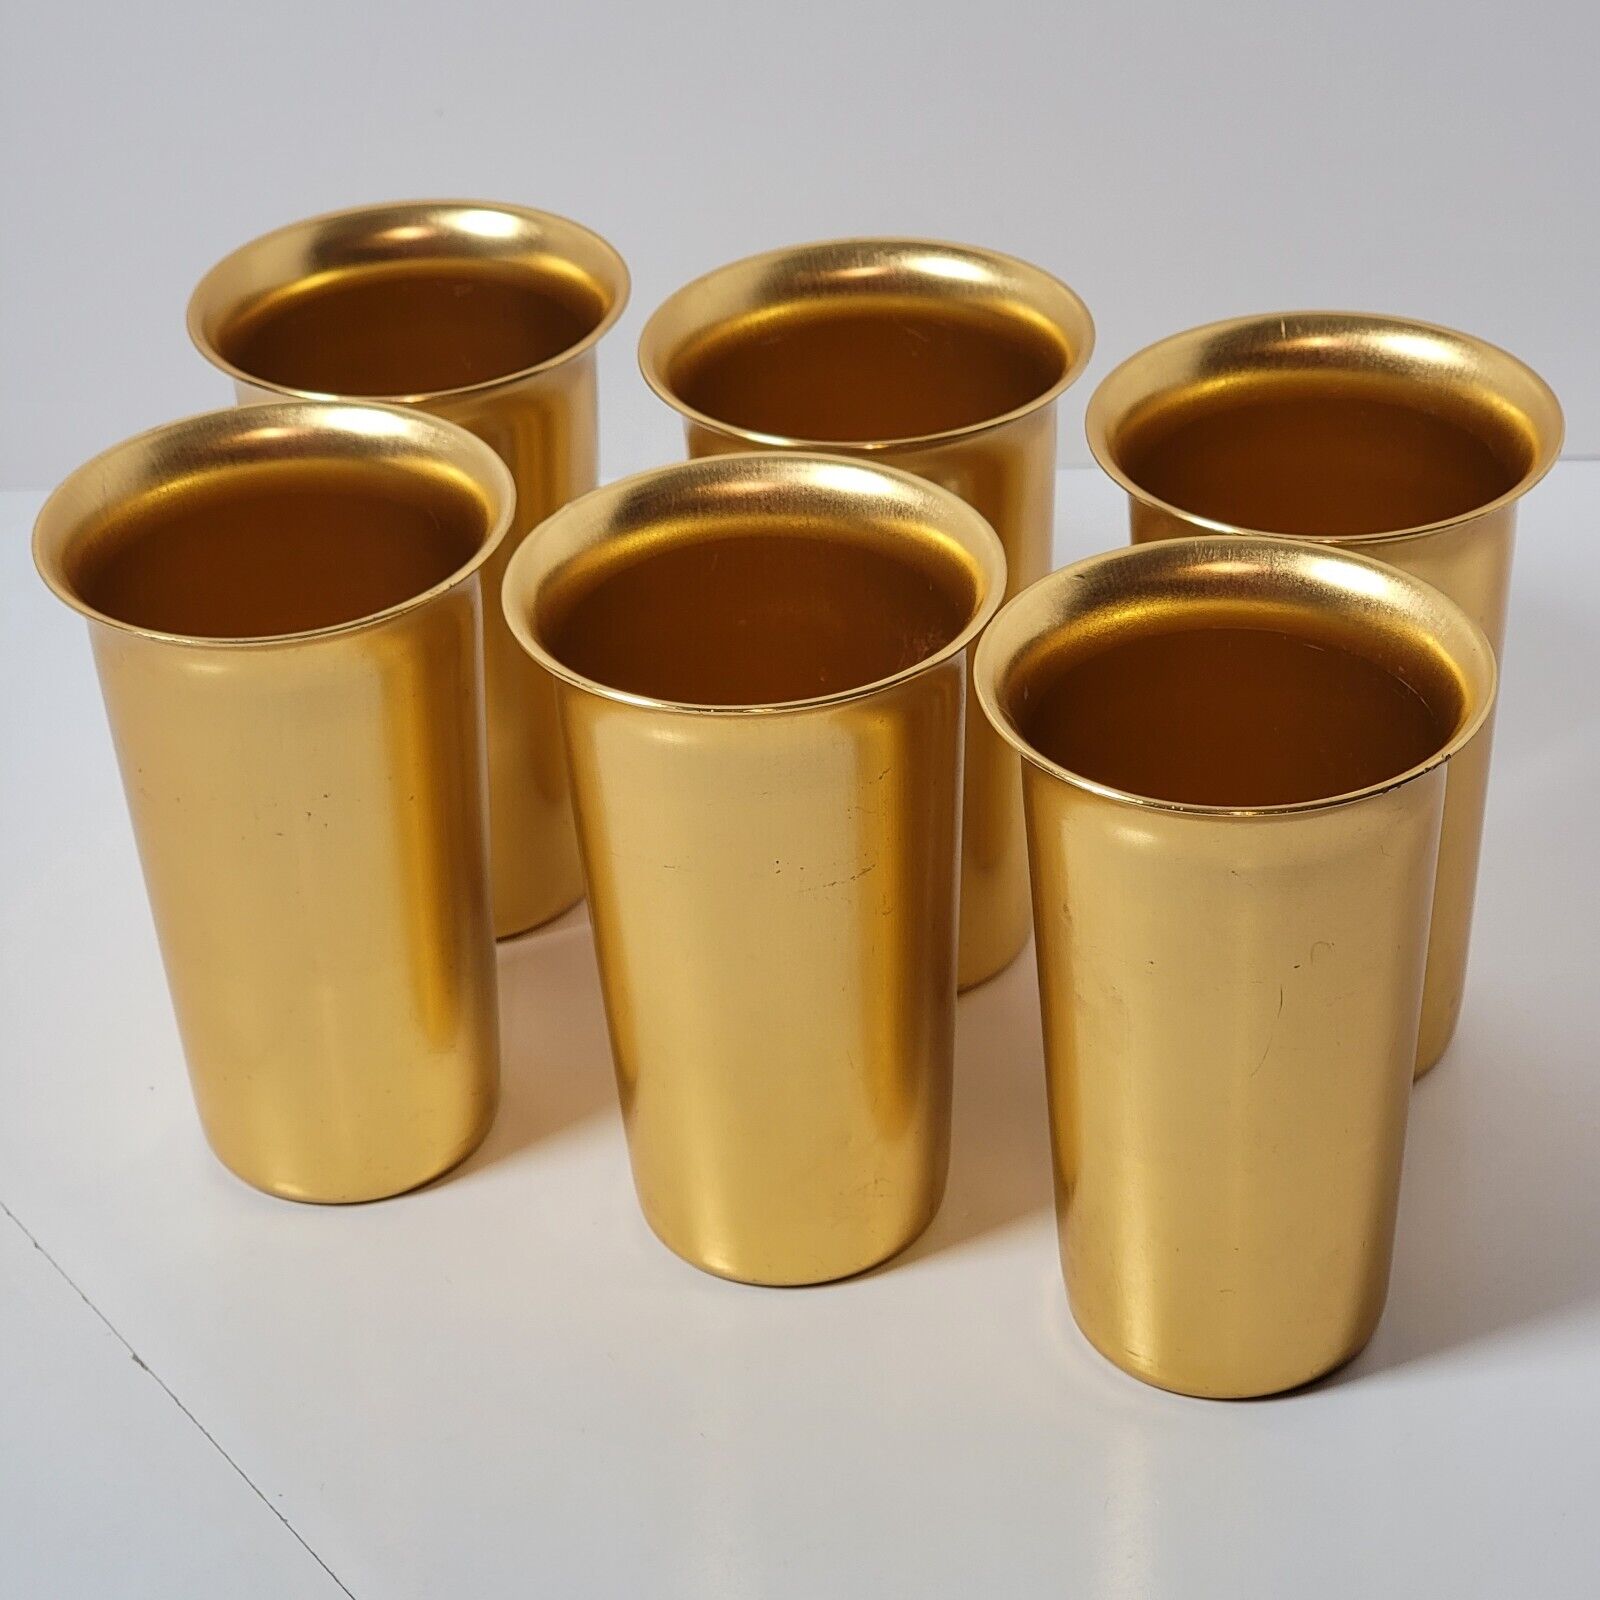 6 Vintage Zephyr Ware Gold Tone Aluminum Anodized Tumblers Cups Made in USA